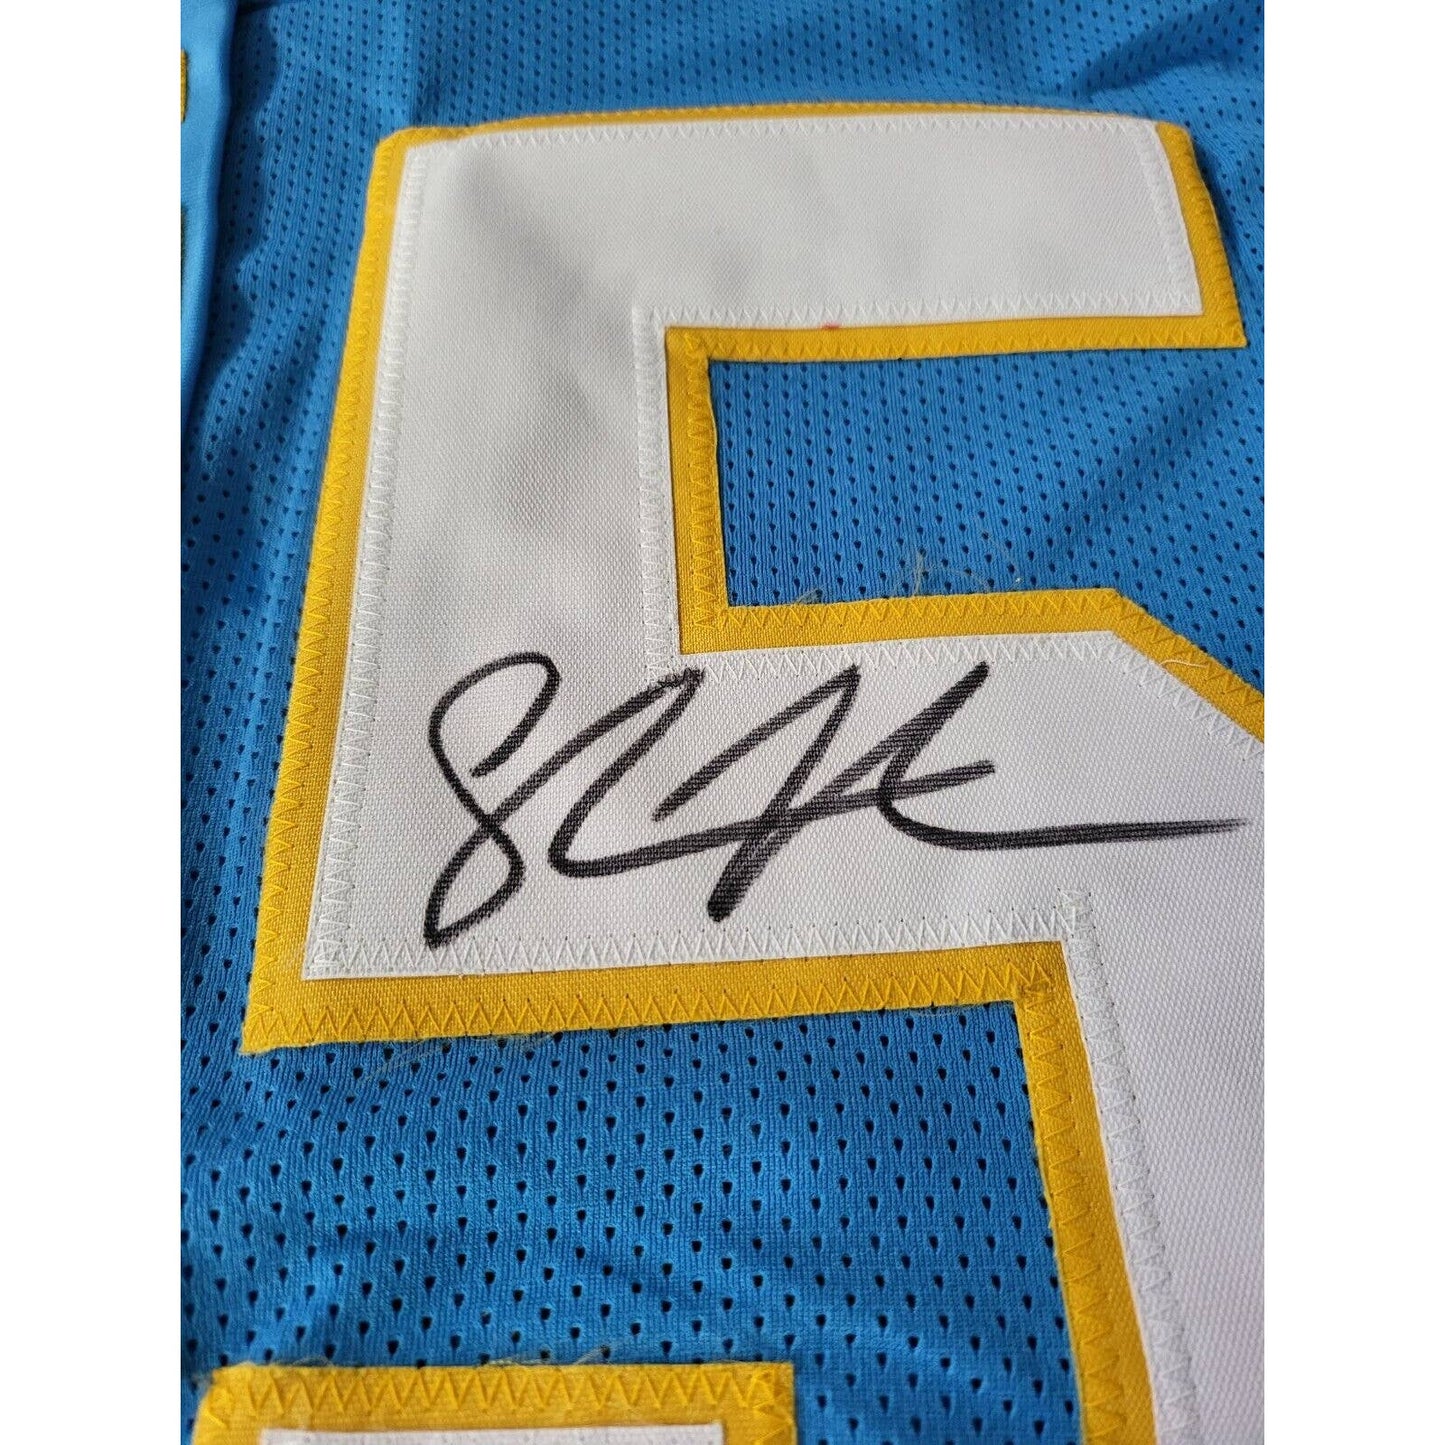 Shawne Merriman Autographed/Signed Jersey COA San Diego Chargers Los Angeles LA - TreasuresEvolved